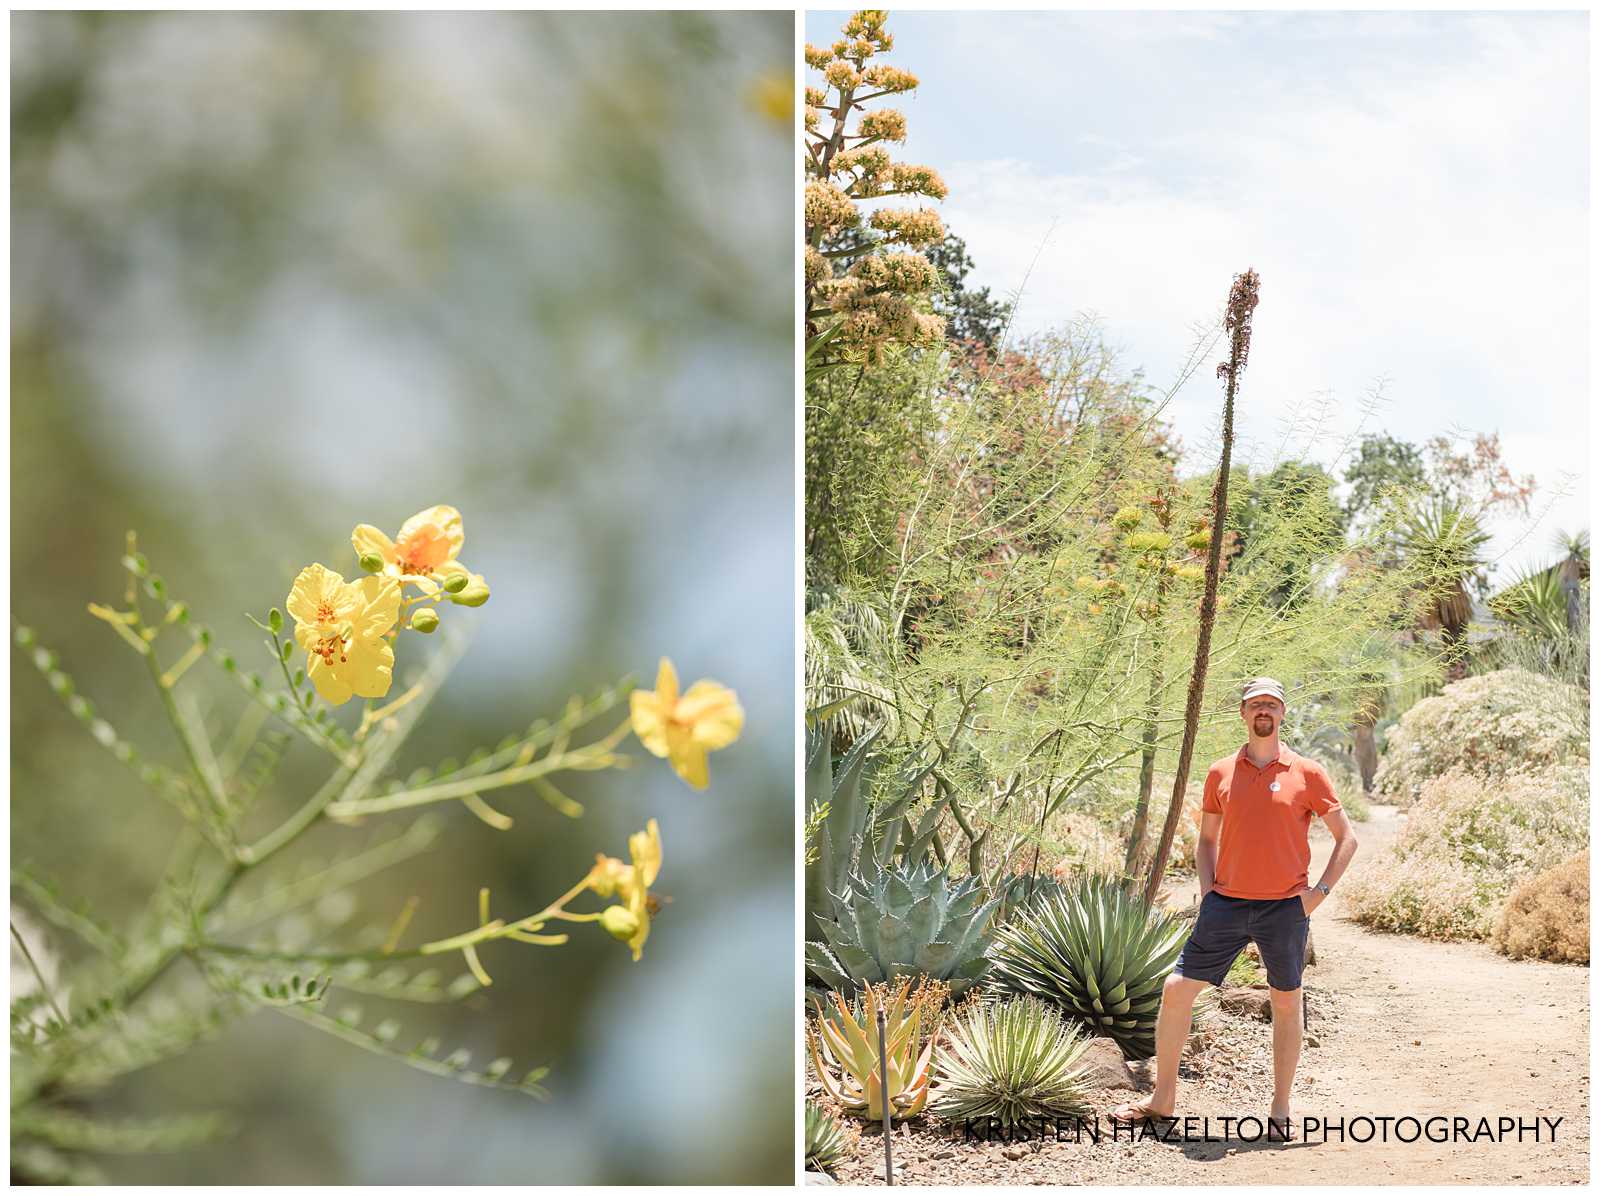 Man in orange shirt standing in front of a blooming agave.